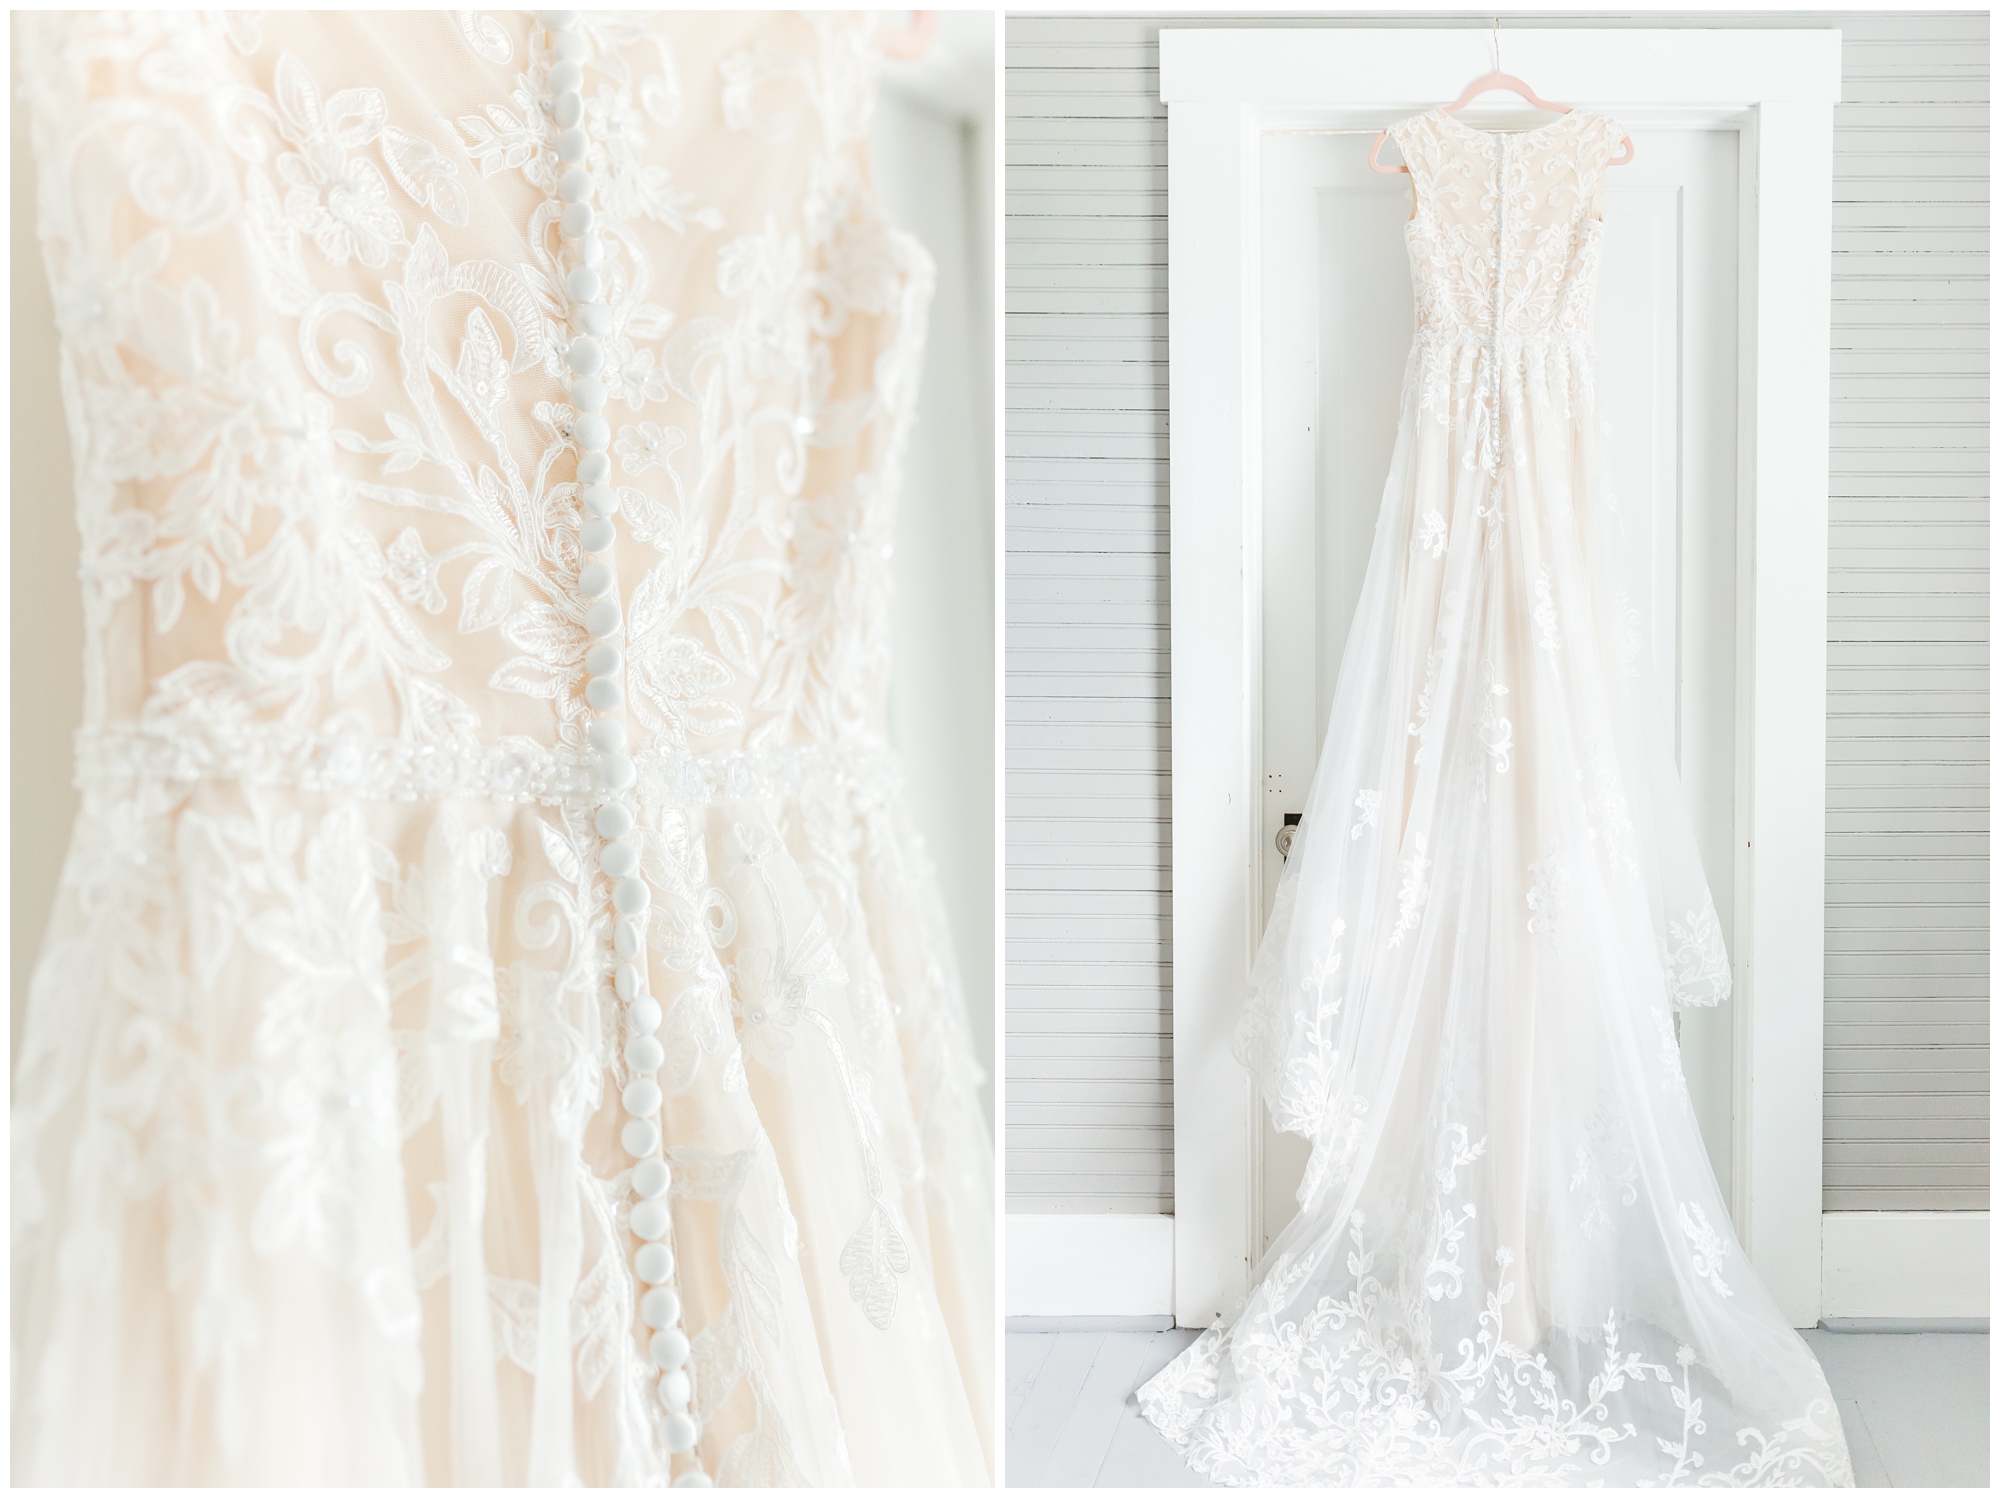 The wedding dress, white and made of lace, is displayed hanging on a white door. The back of the dress is the focus, with its buttons all the way up the back. 